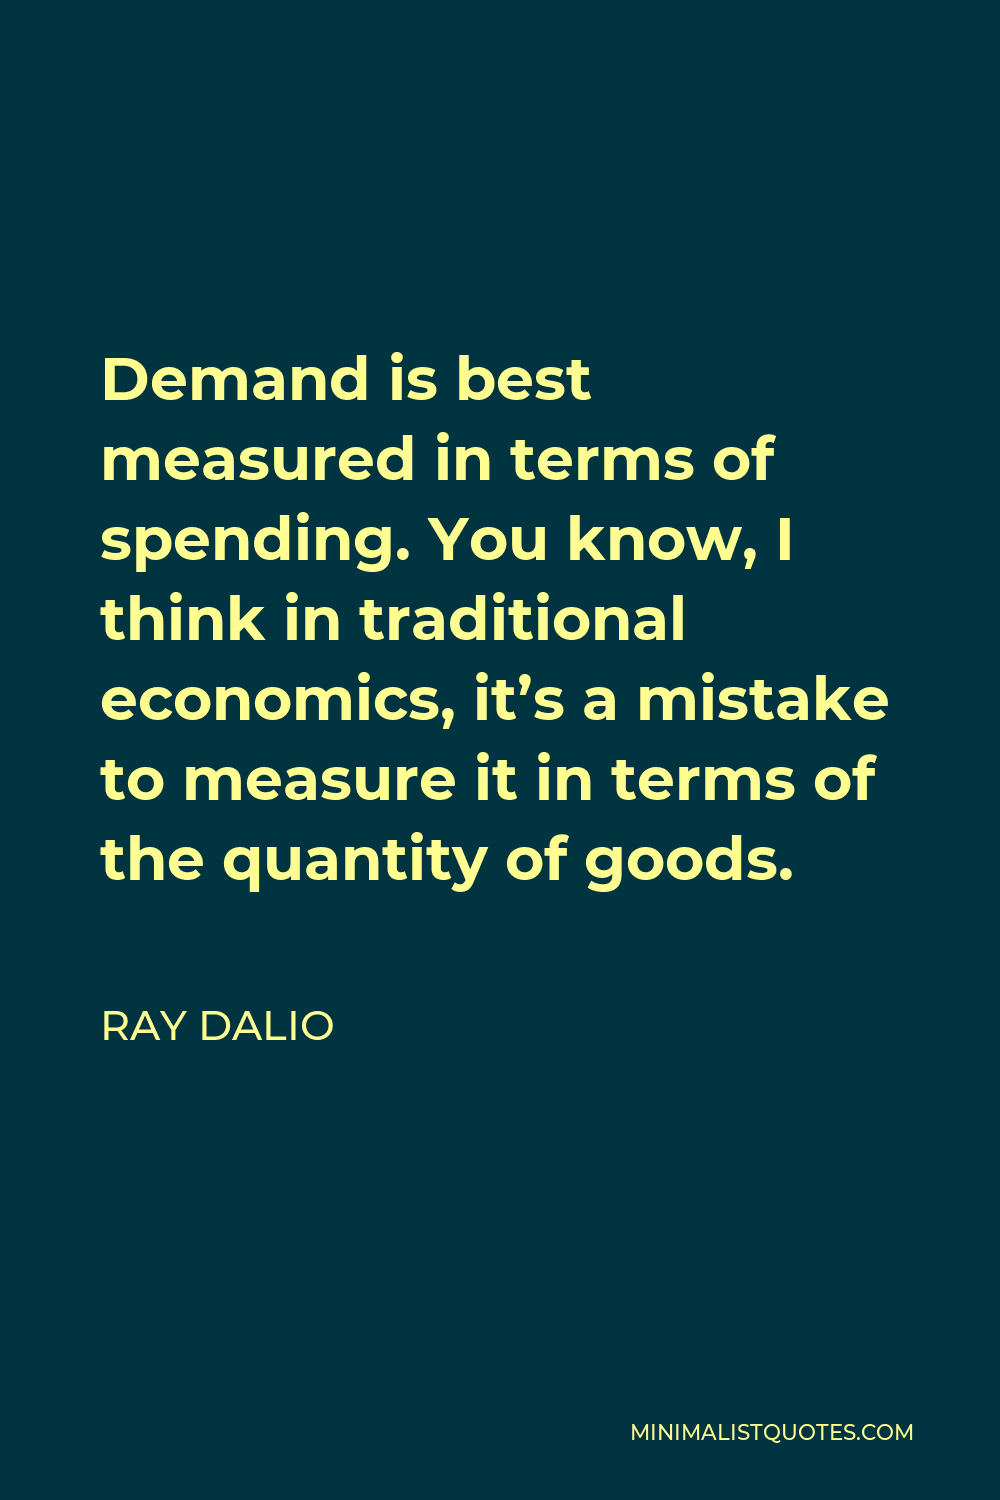 Ray Dalio Quote - Demand is best measured in terms of spending. You know, I think in traditional economics, it’s a mistake to measure it in terms of the quantity of goods.